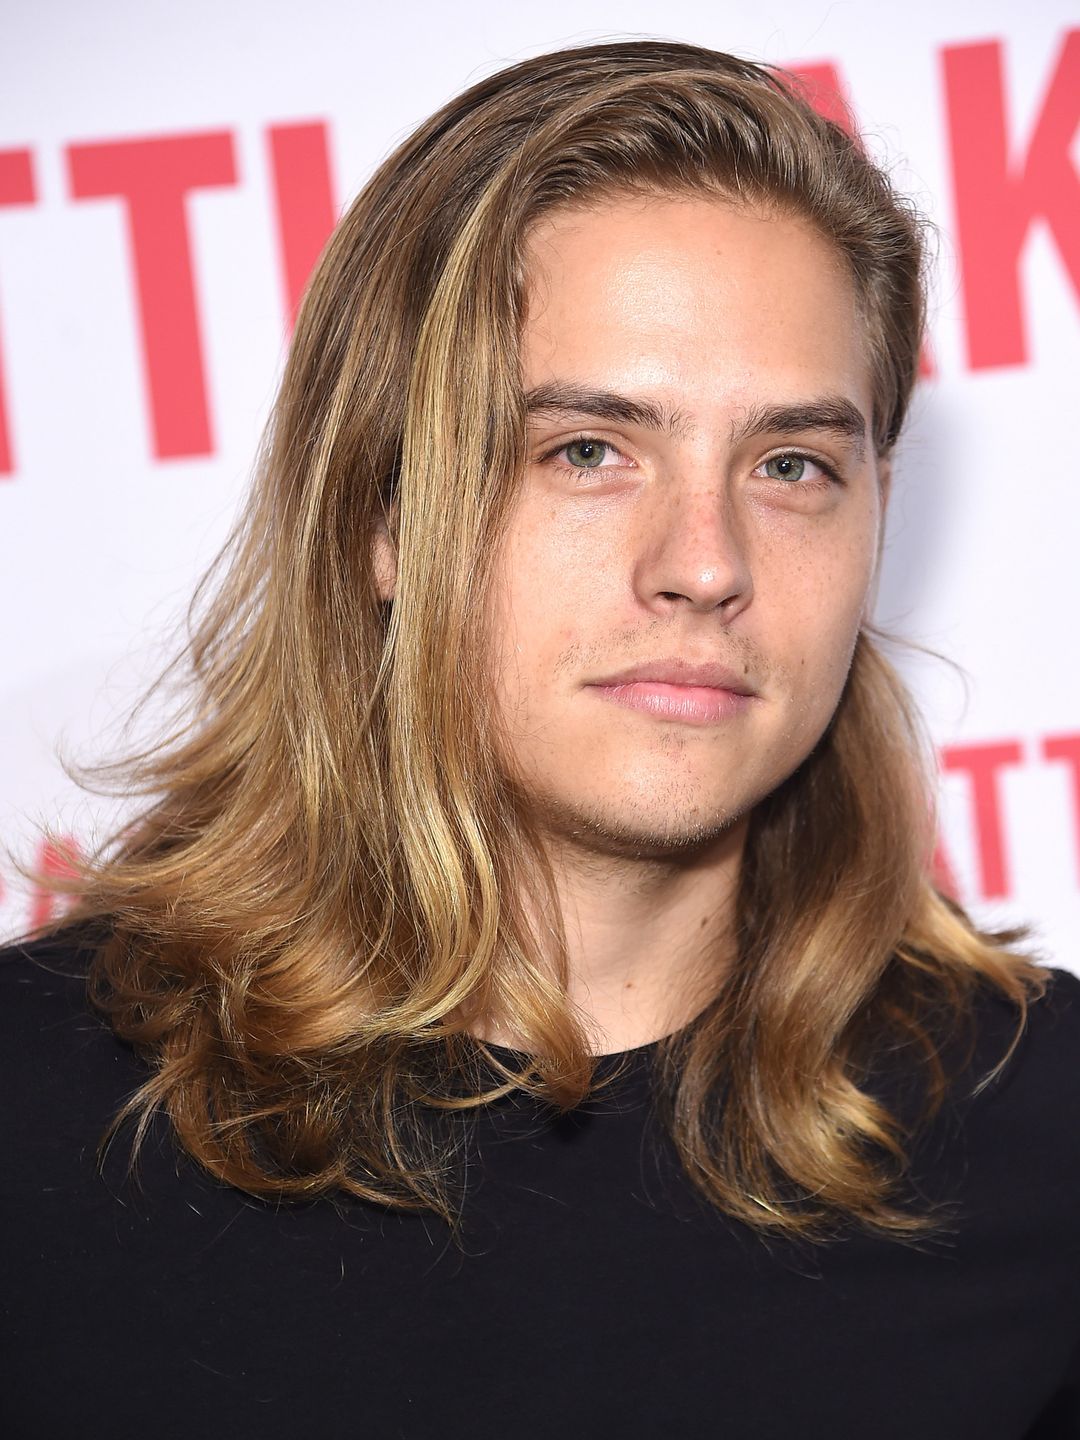 Dylan Sprouse does he have kids